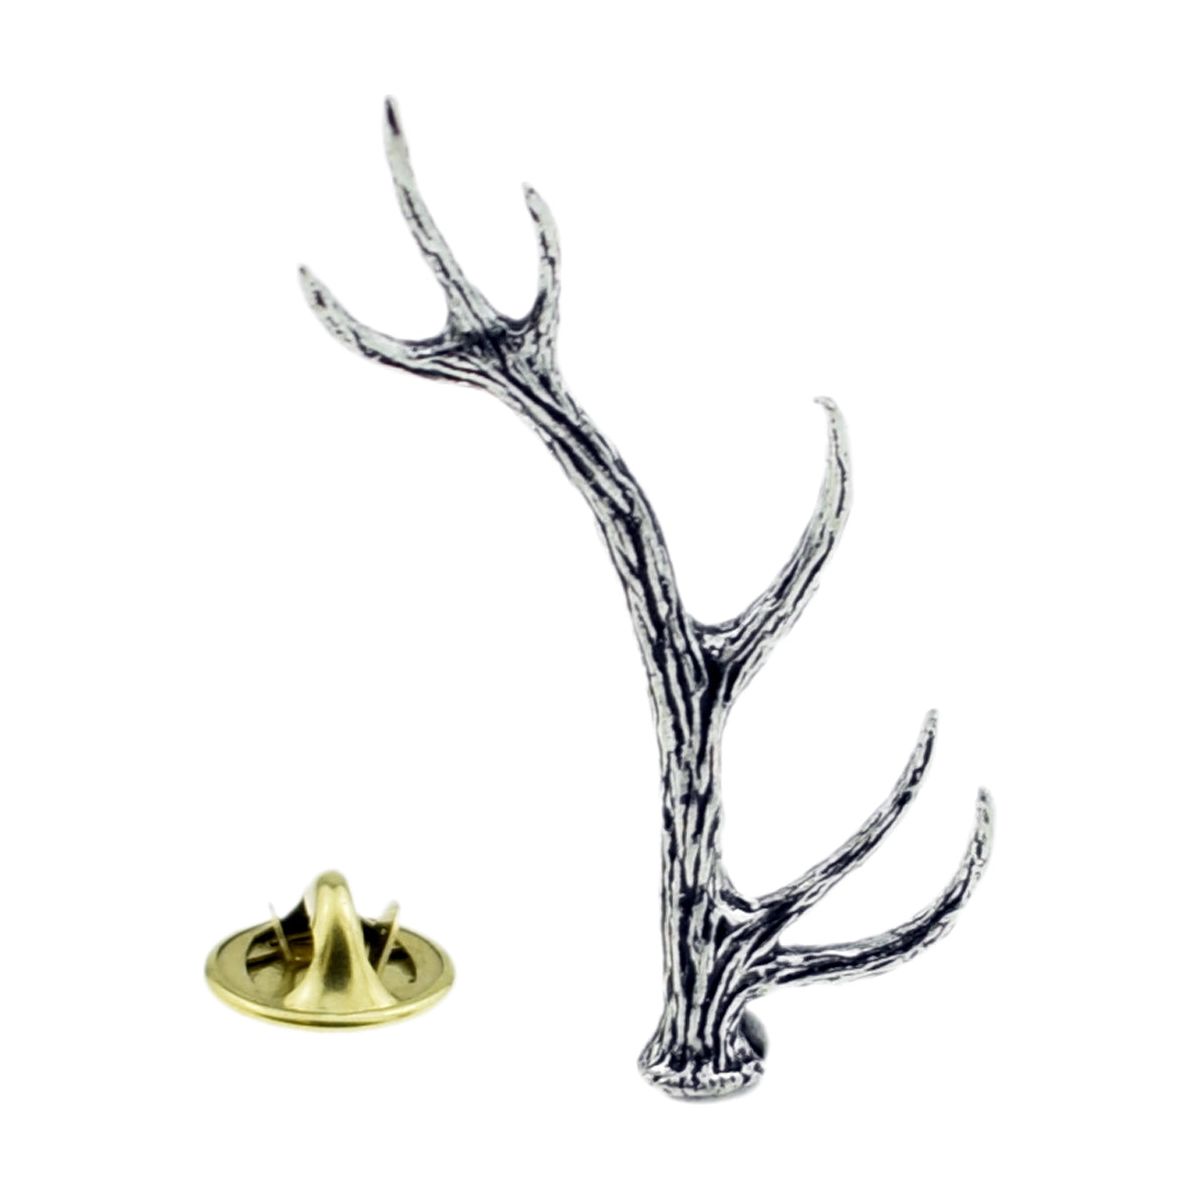 Red Stag Antler English Pewter Lapel Pin Badge - Ashton and Finch